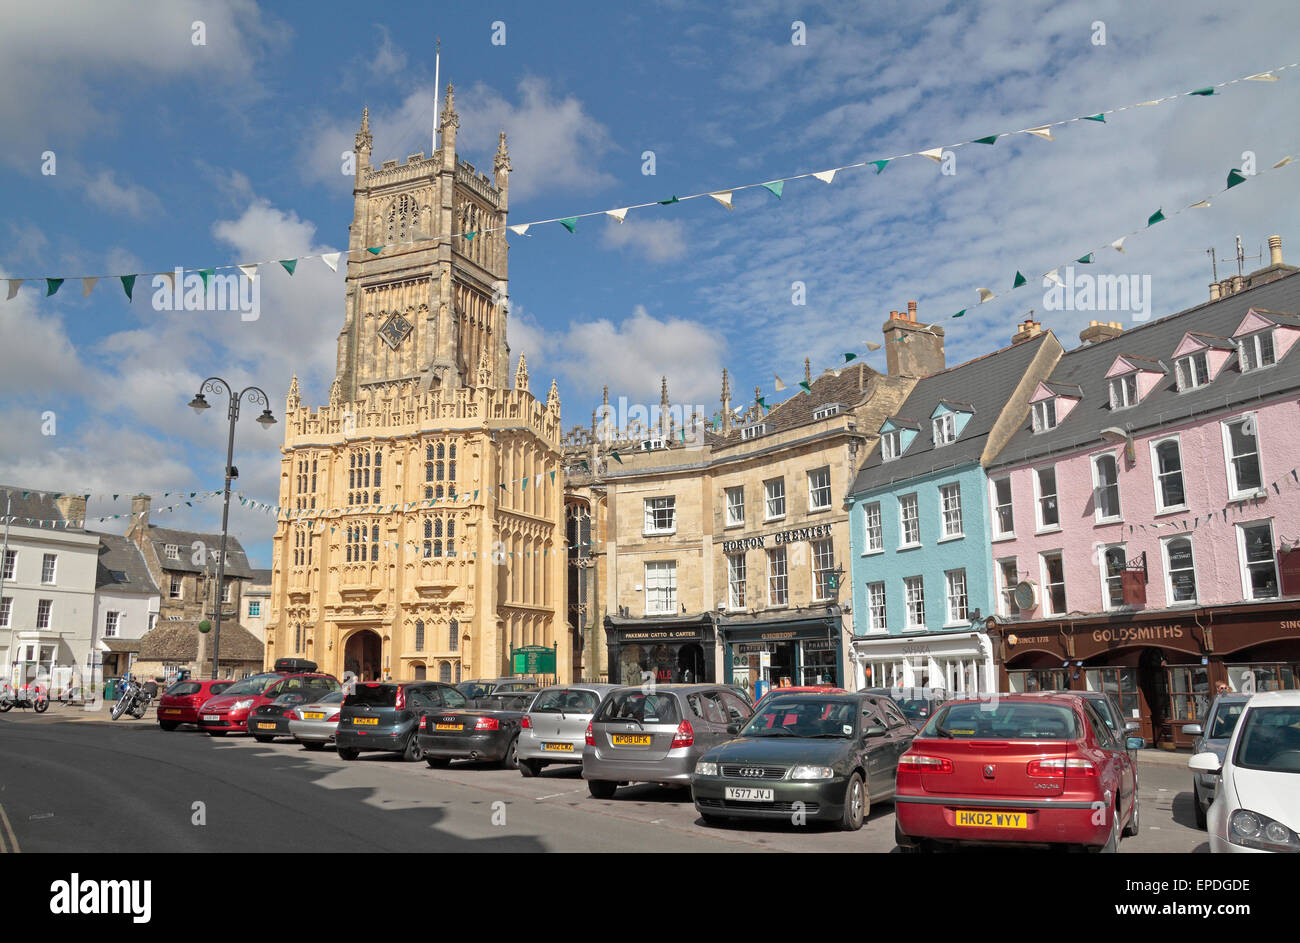 The Church of St John the Baptist and the colourful buildings on Market Place, Cirencester, Gloucestershire, UK. Stock Photo